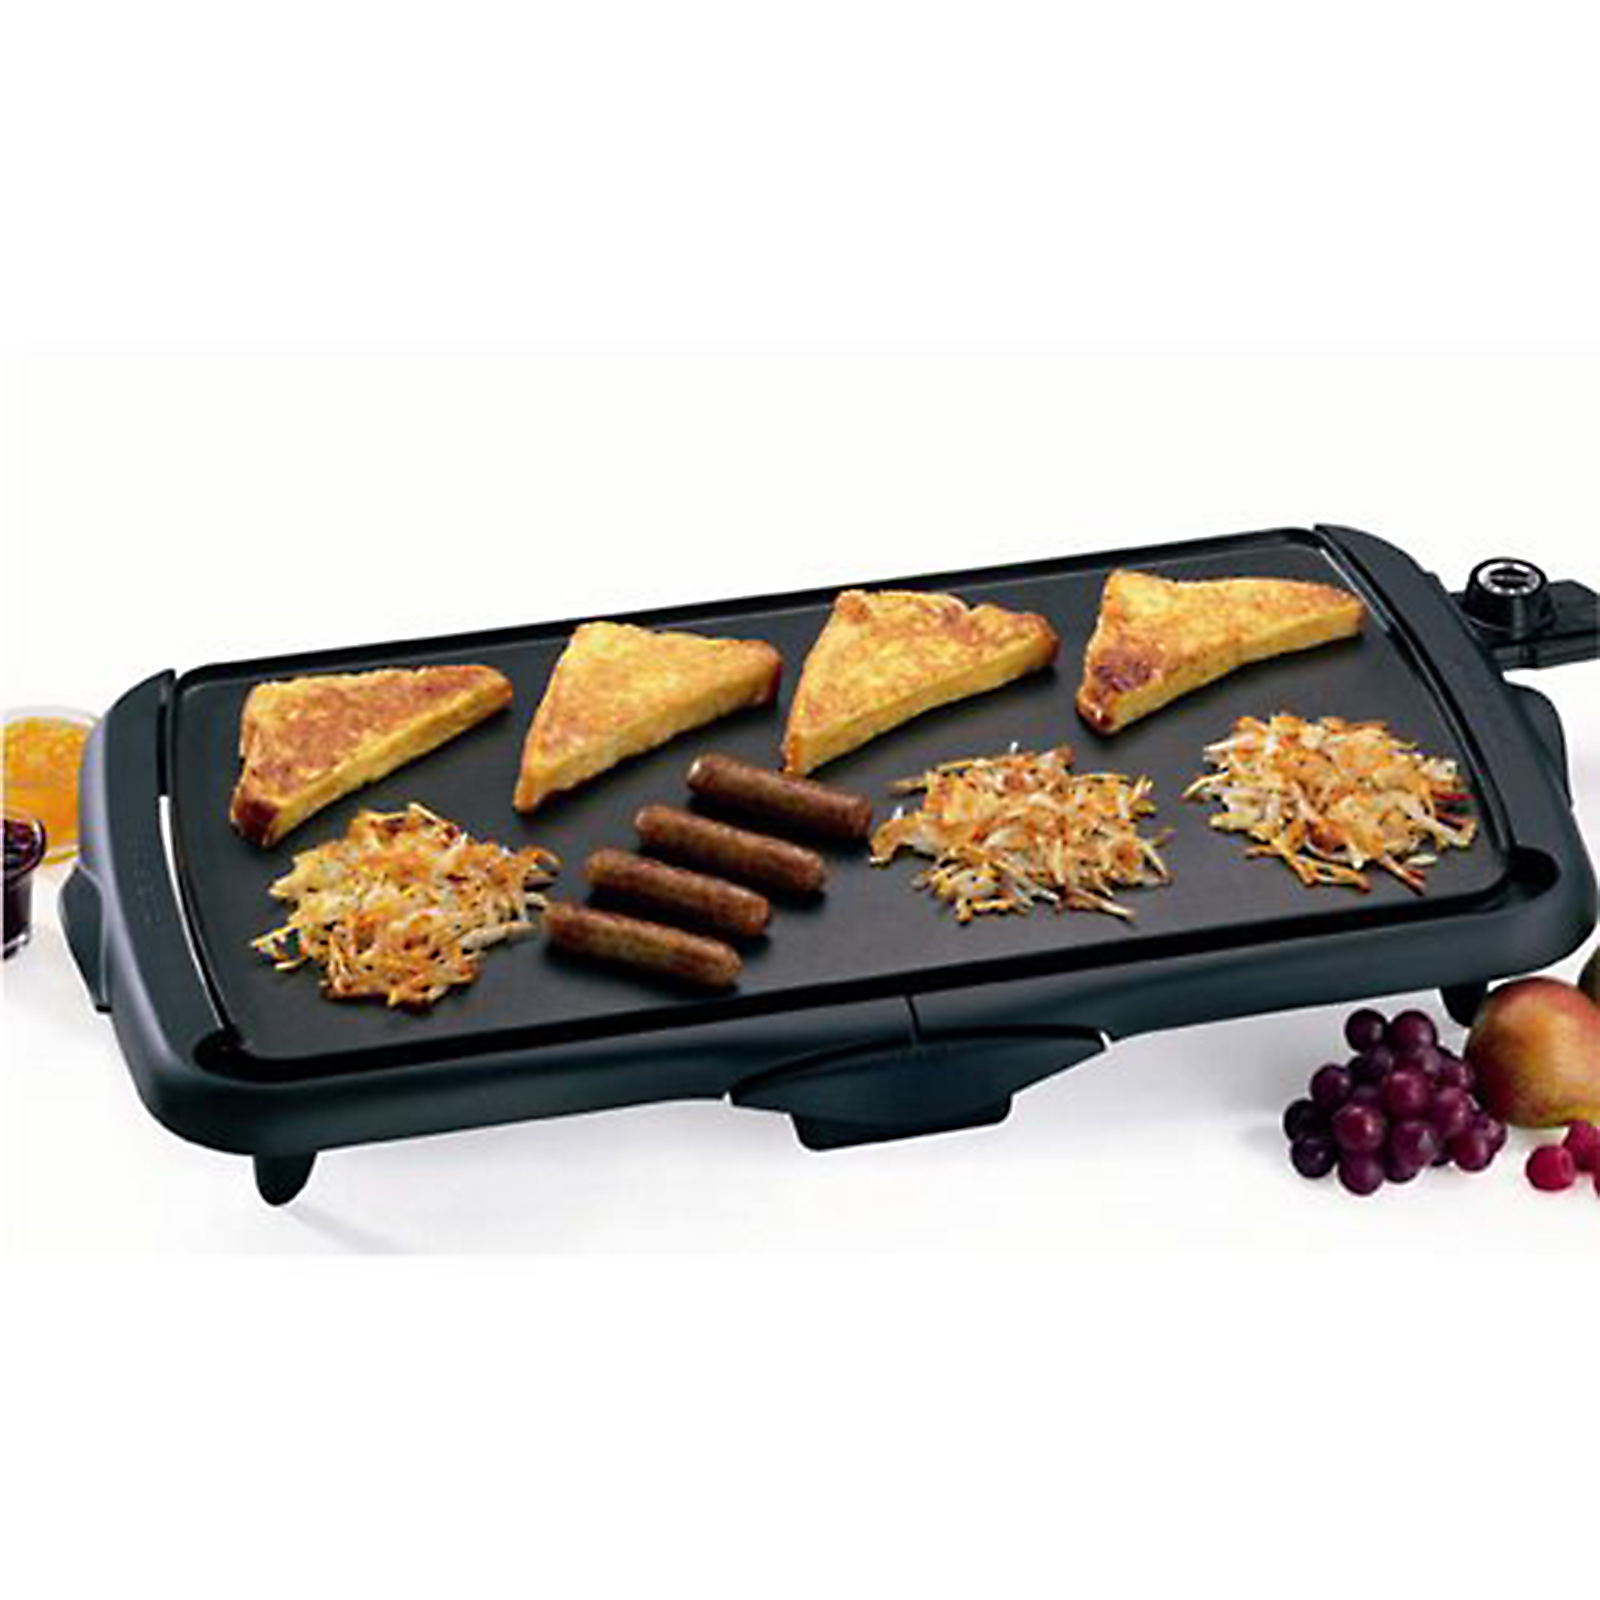 presto-176378-10-5-x-20-5-cool-touch-jumbo-griddle